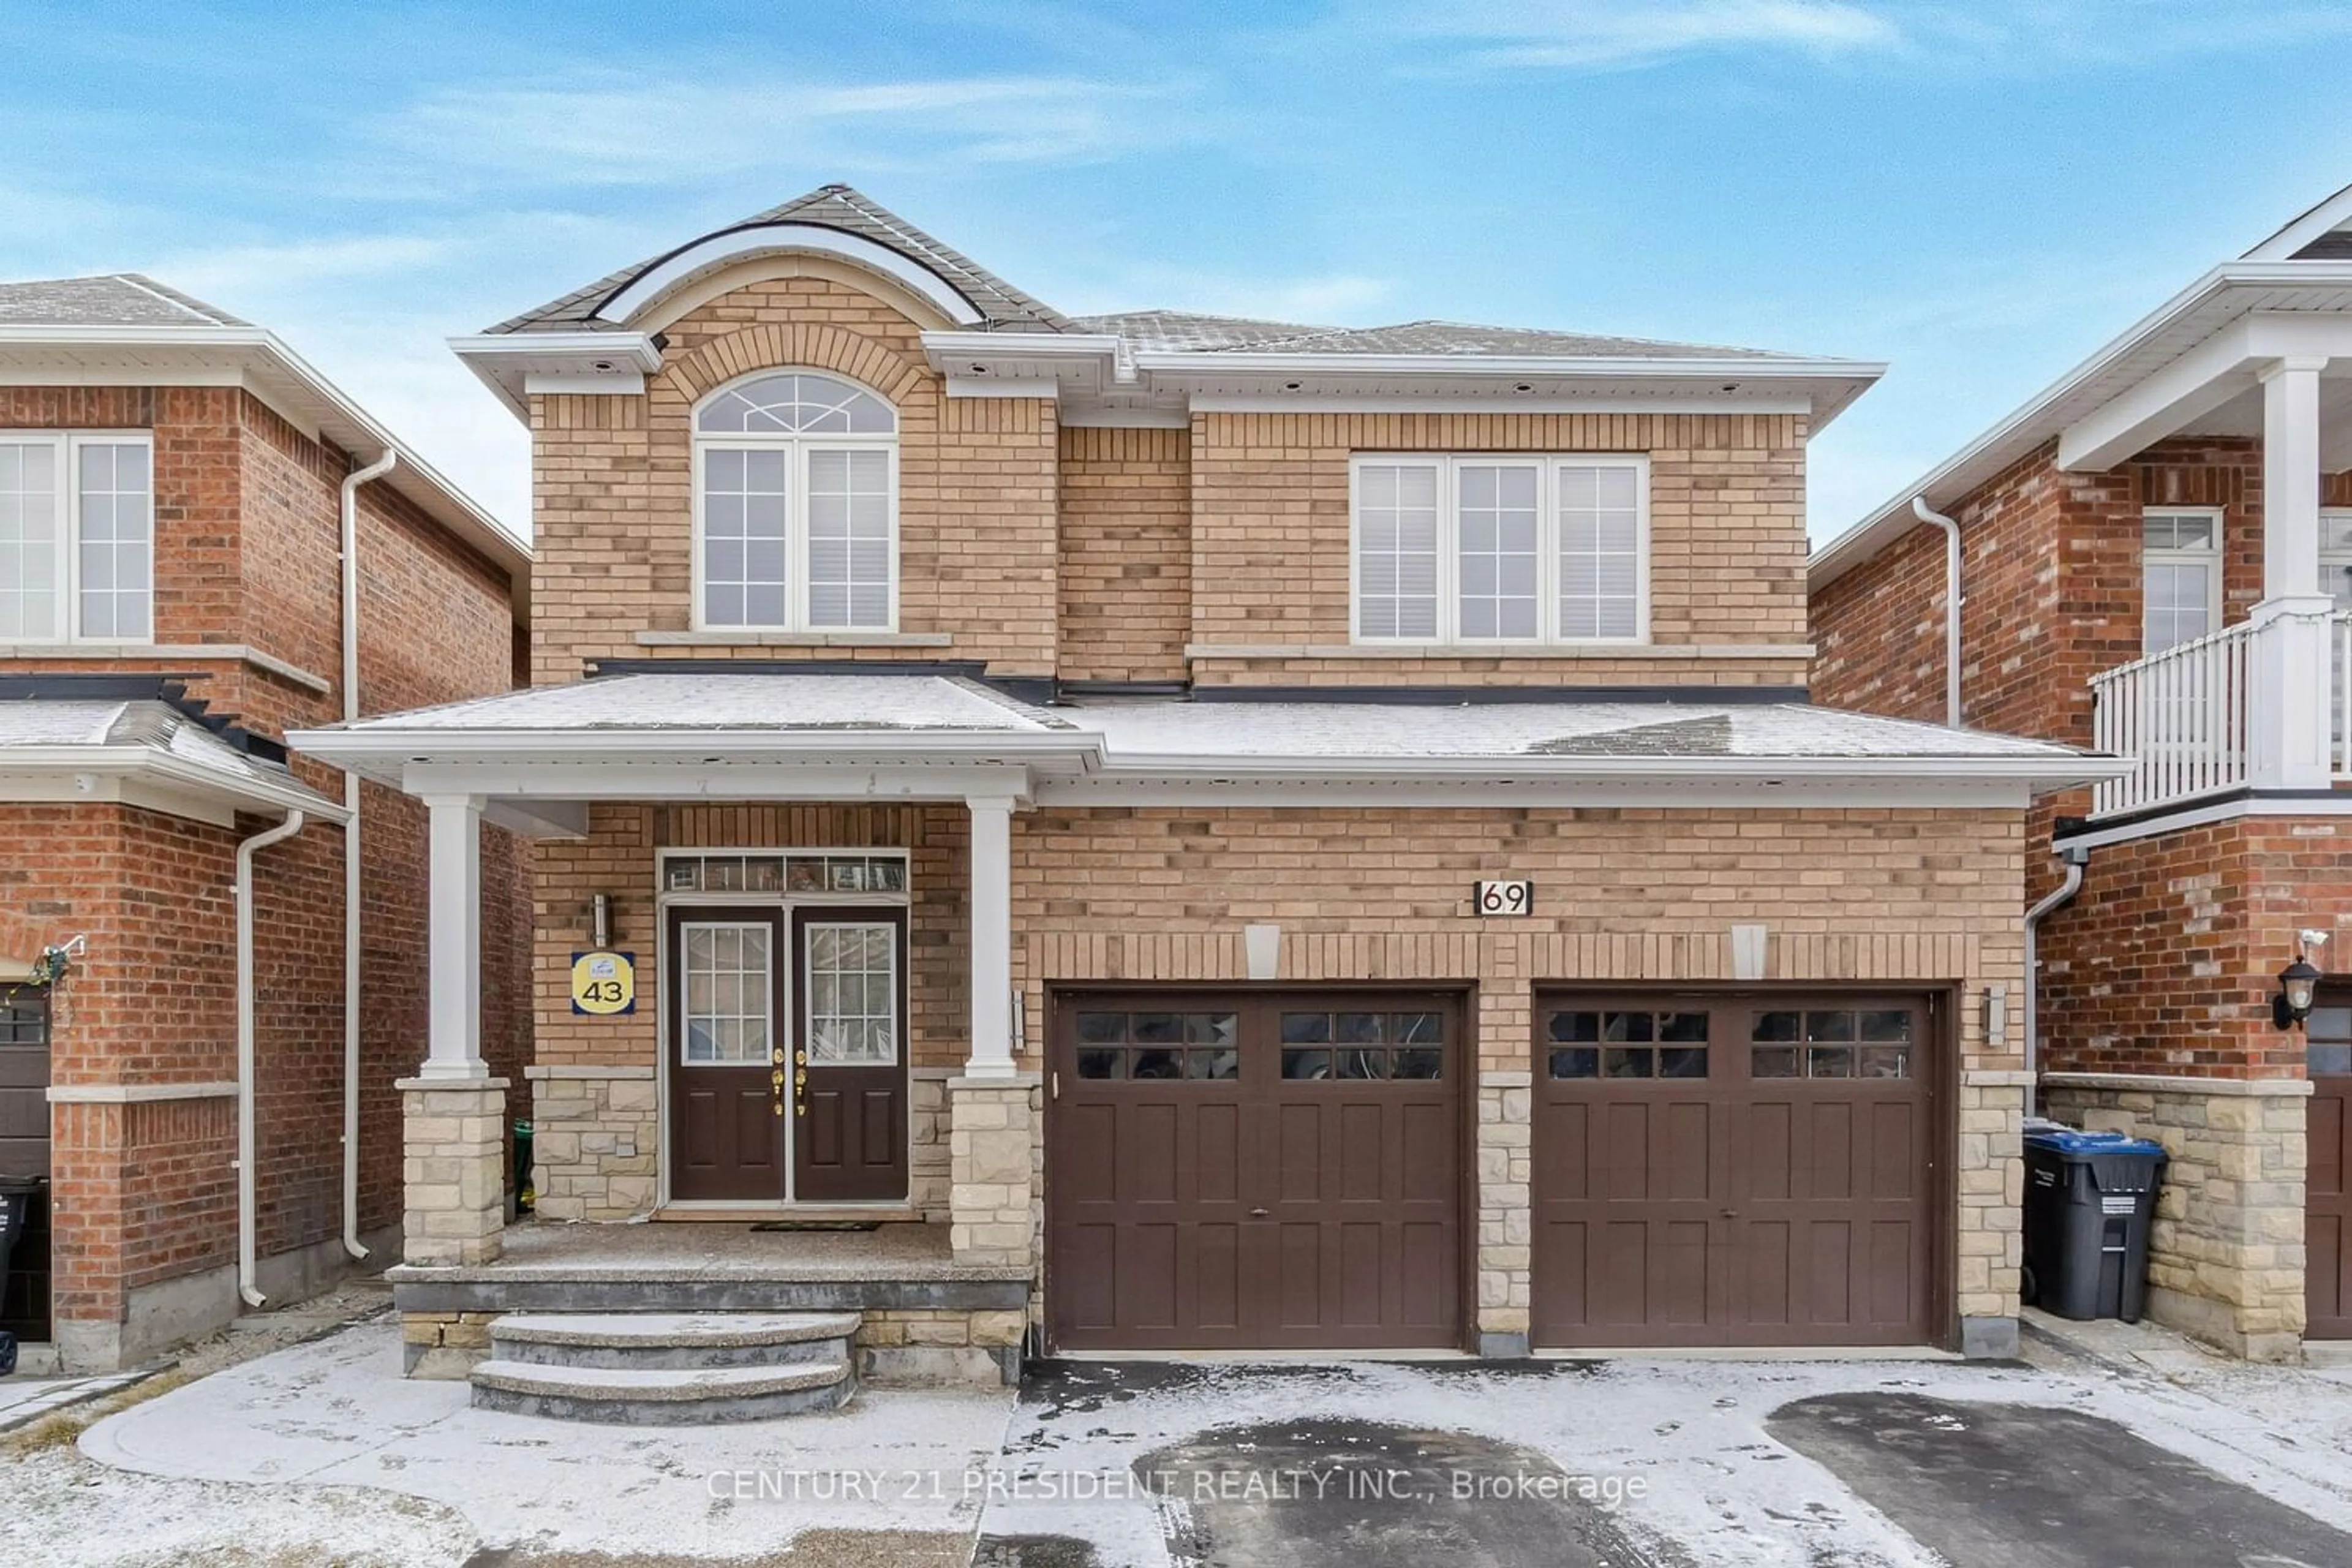 Home with brick exterior material for 69 Summitgreen Cres, Brampton Ontario L6R 0T5